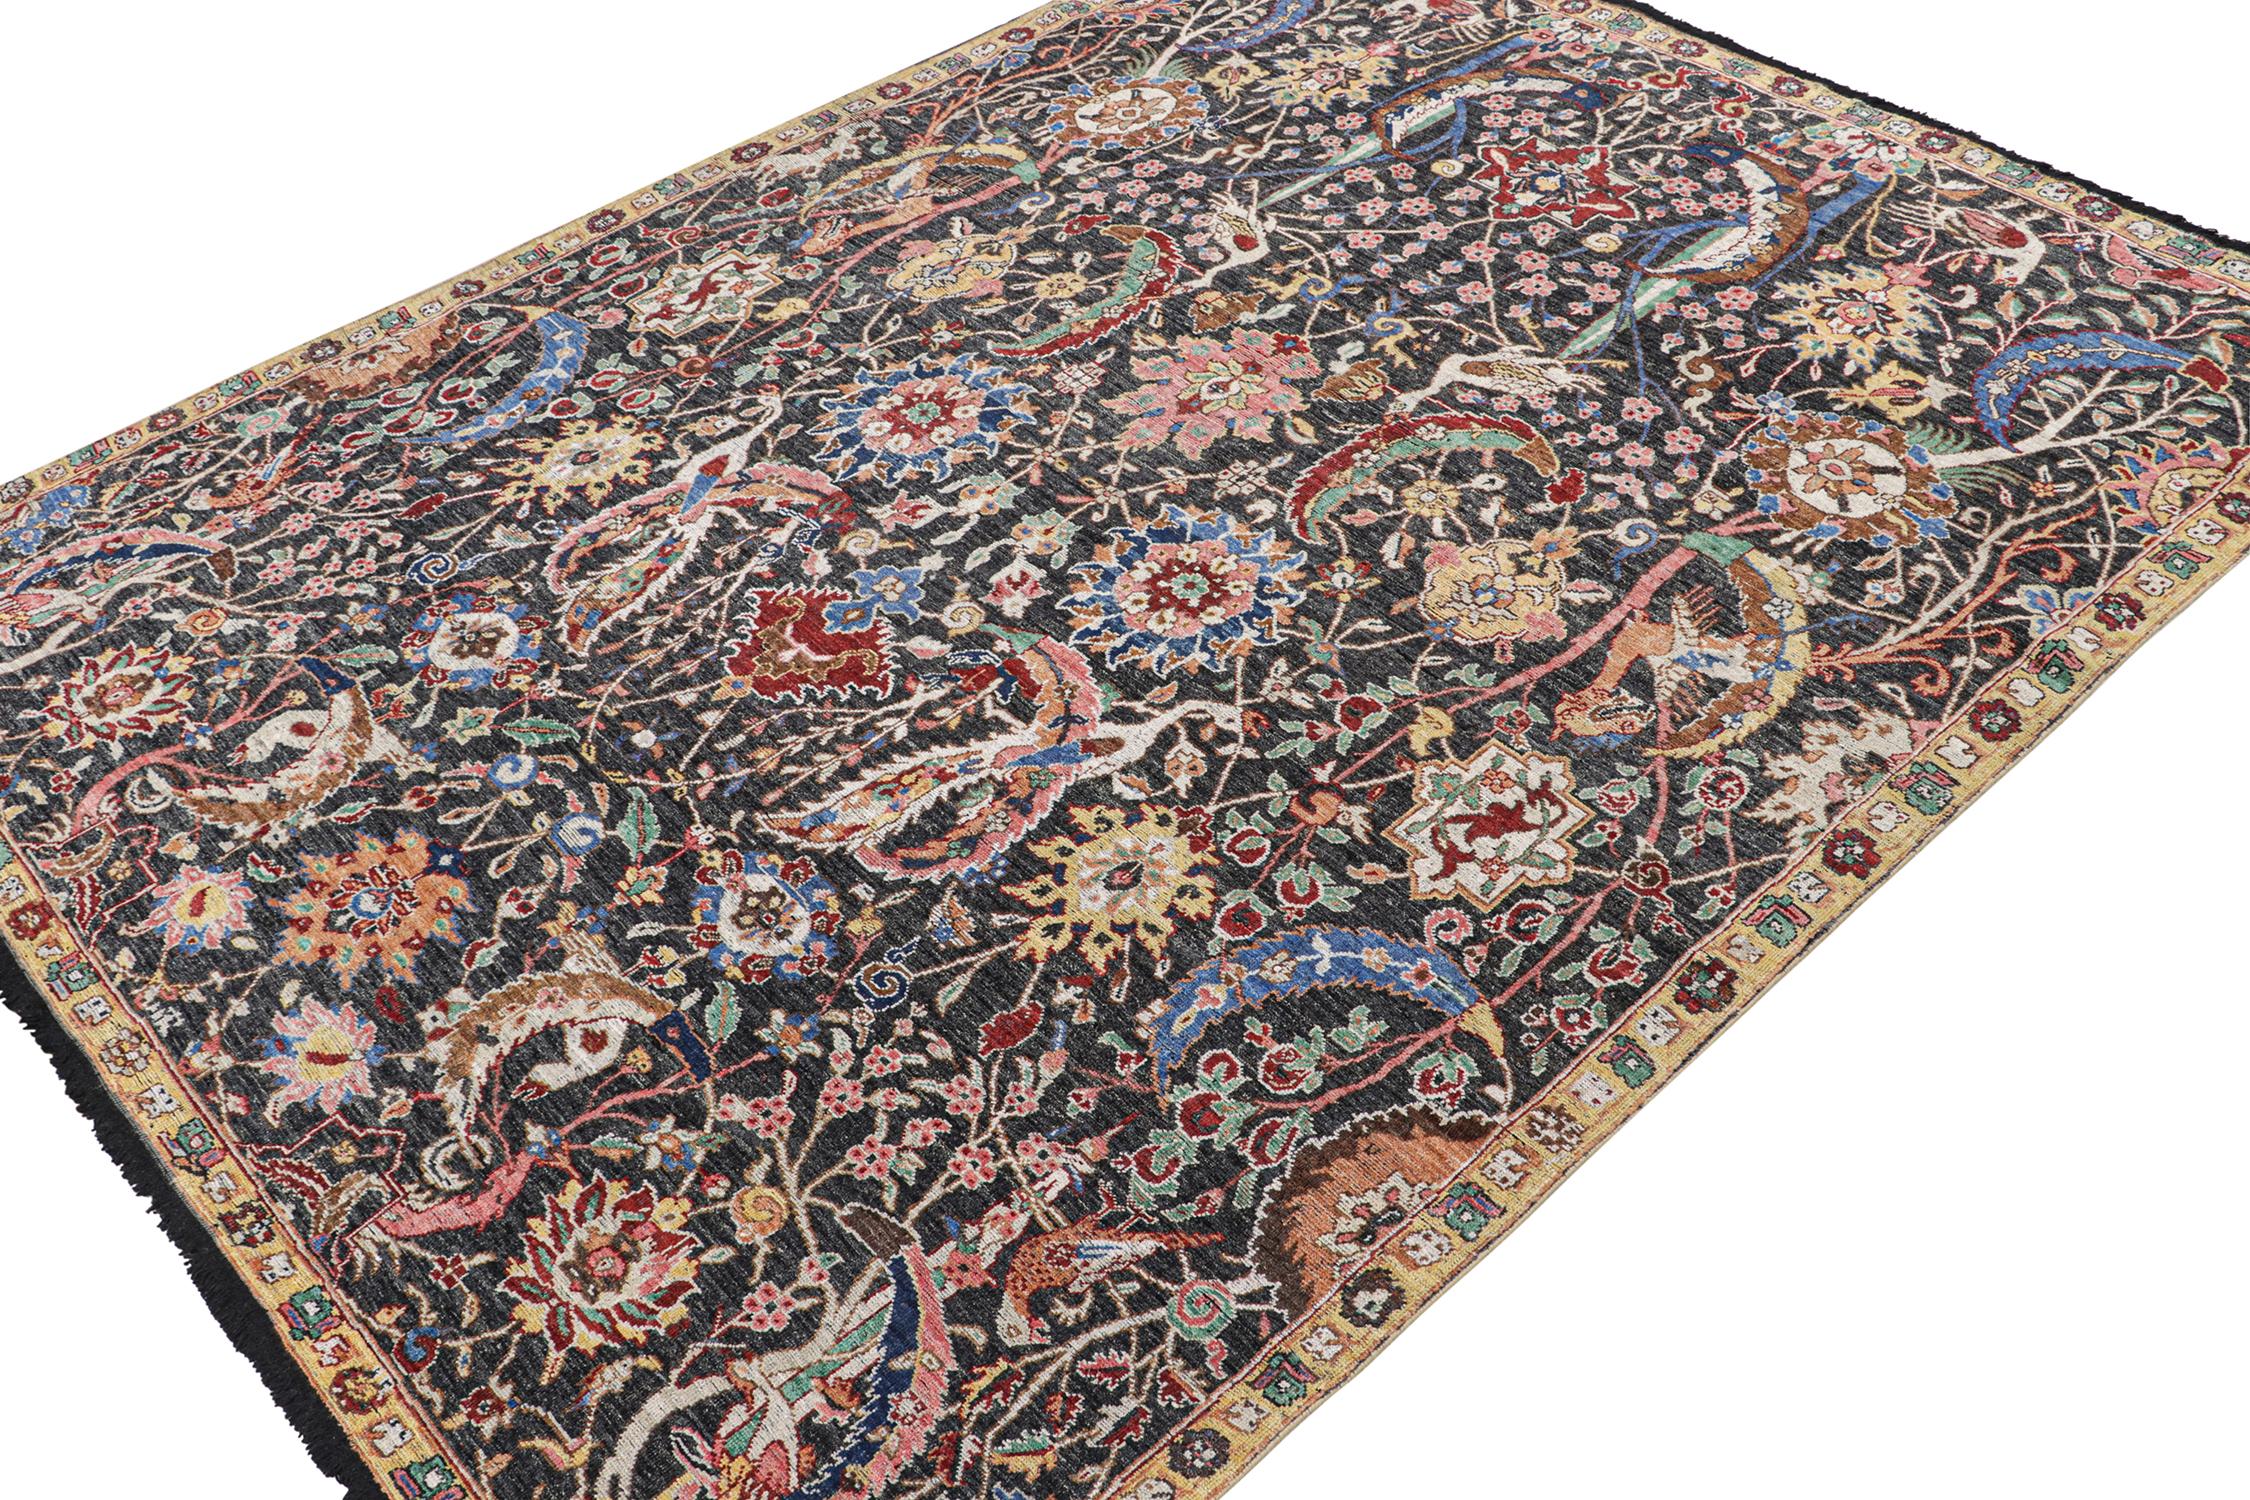 Indian Rug & Kilim’s Persian-Style Rug in Gray with Vibrant Floral Patterns For Sale